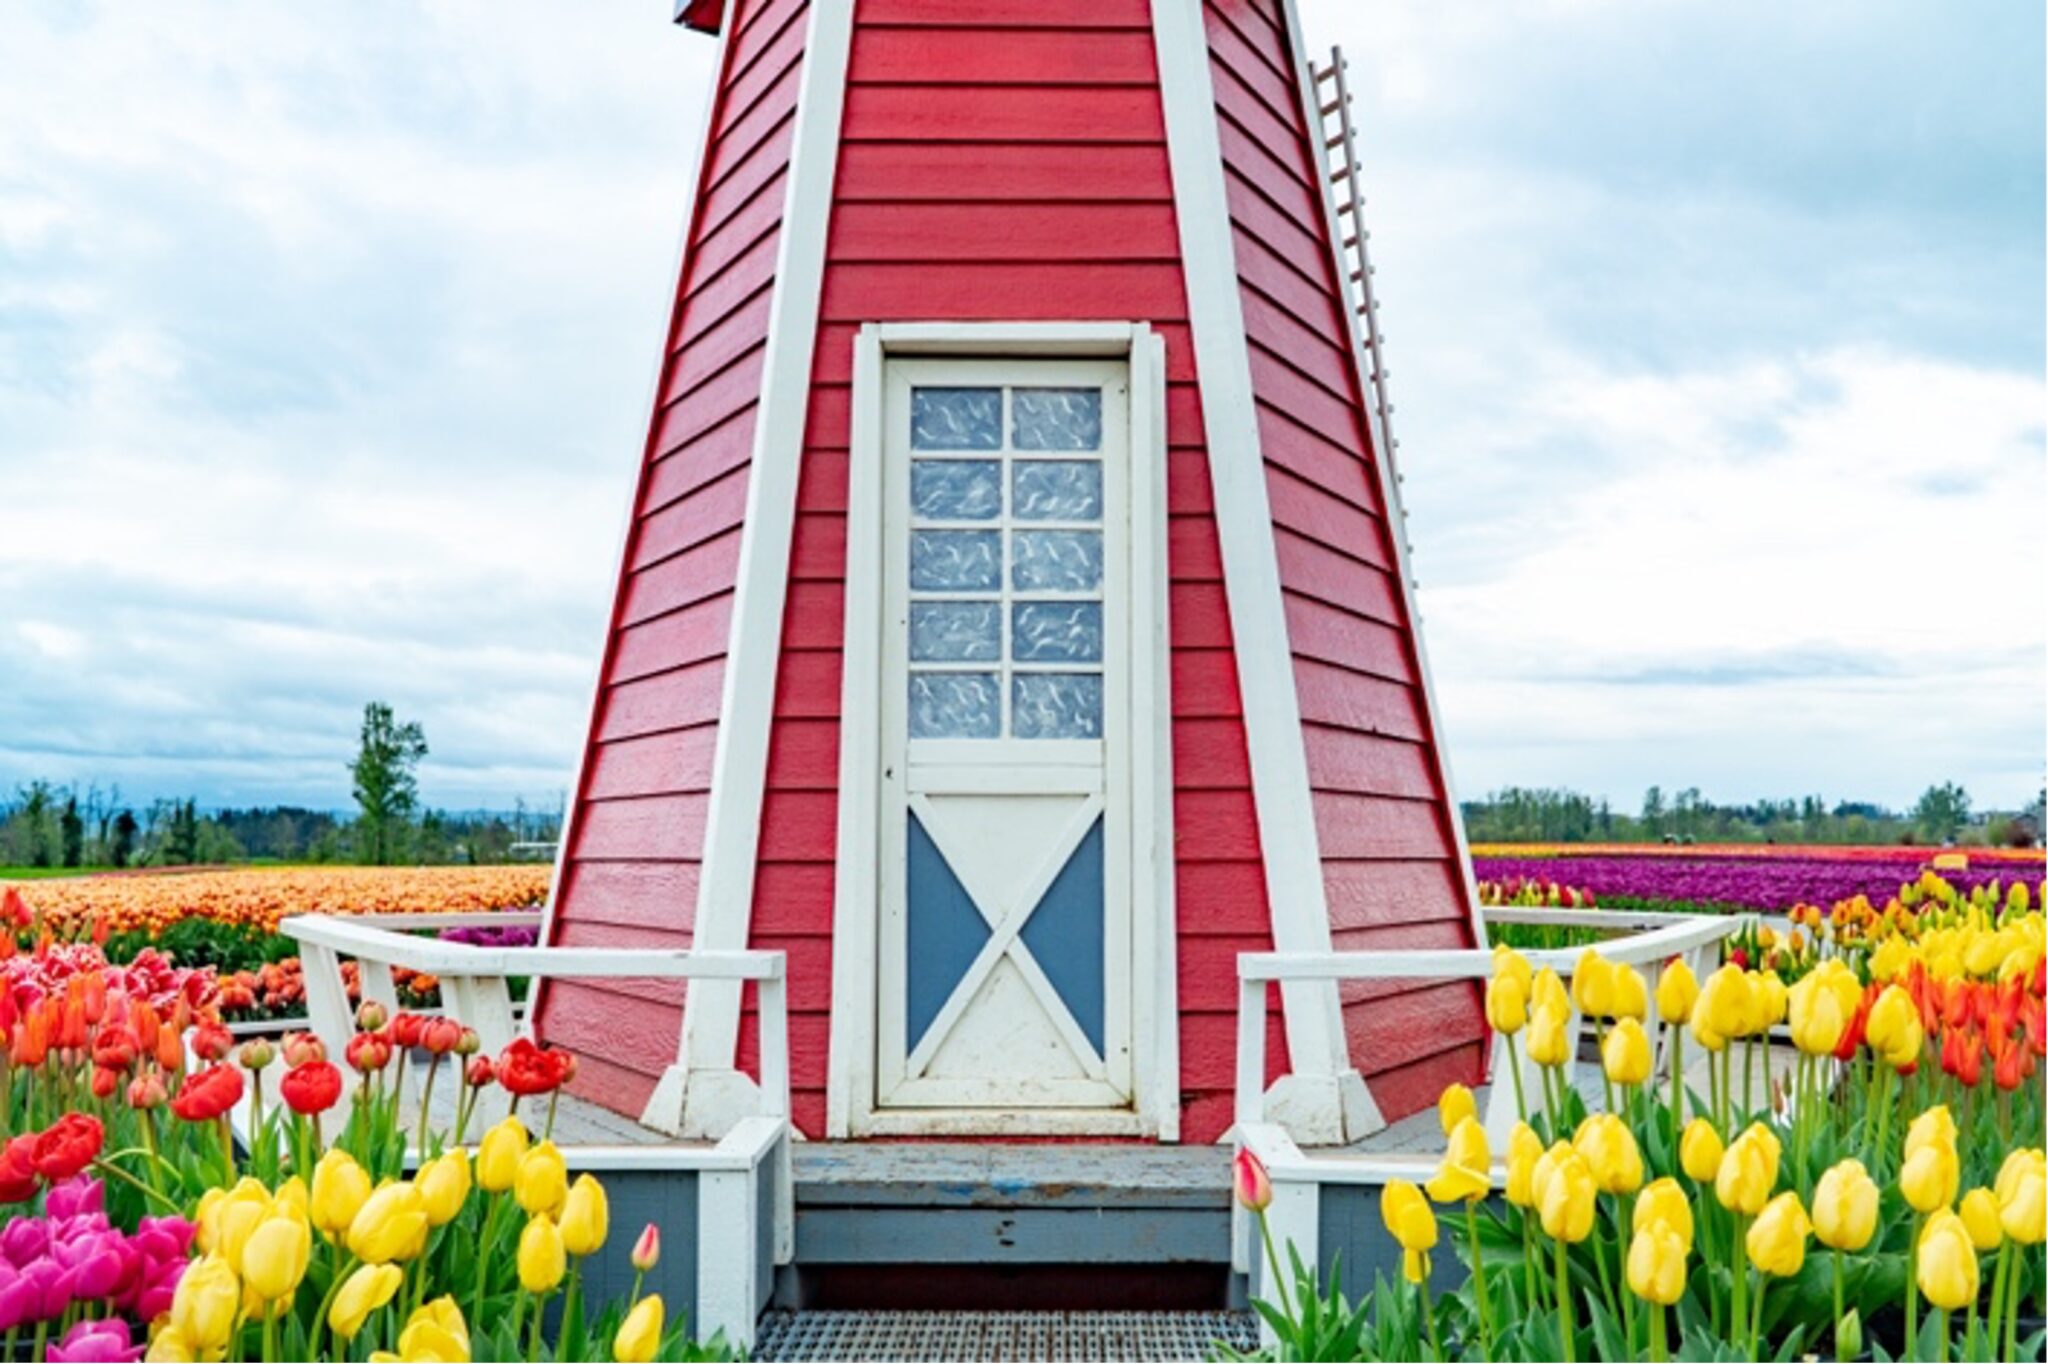 Tulips surrounding a red windmill